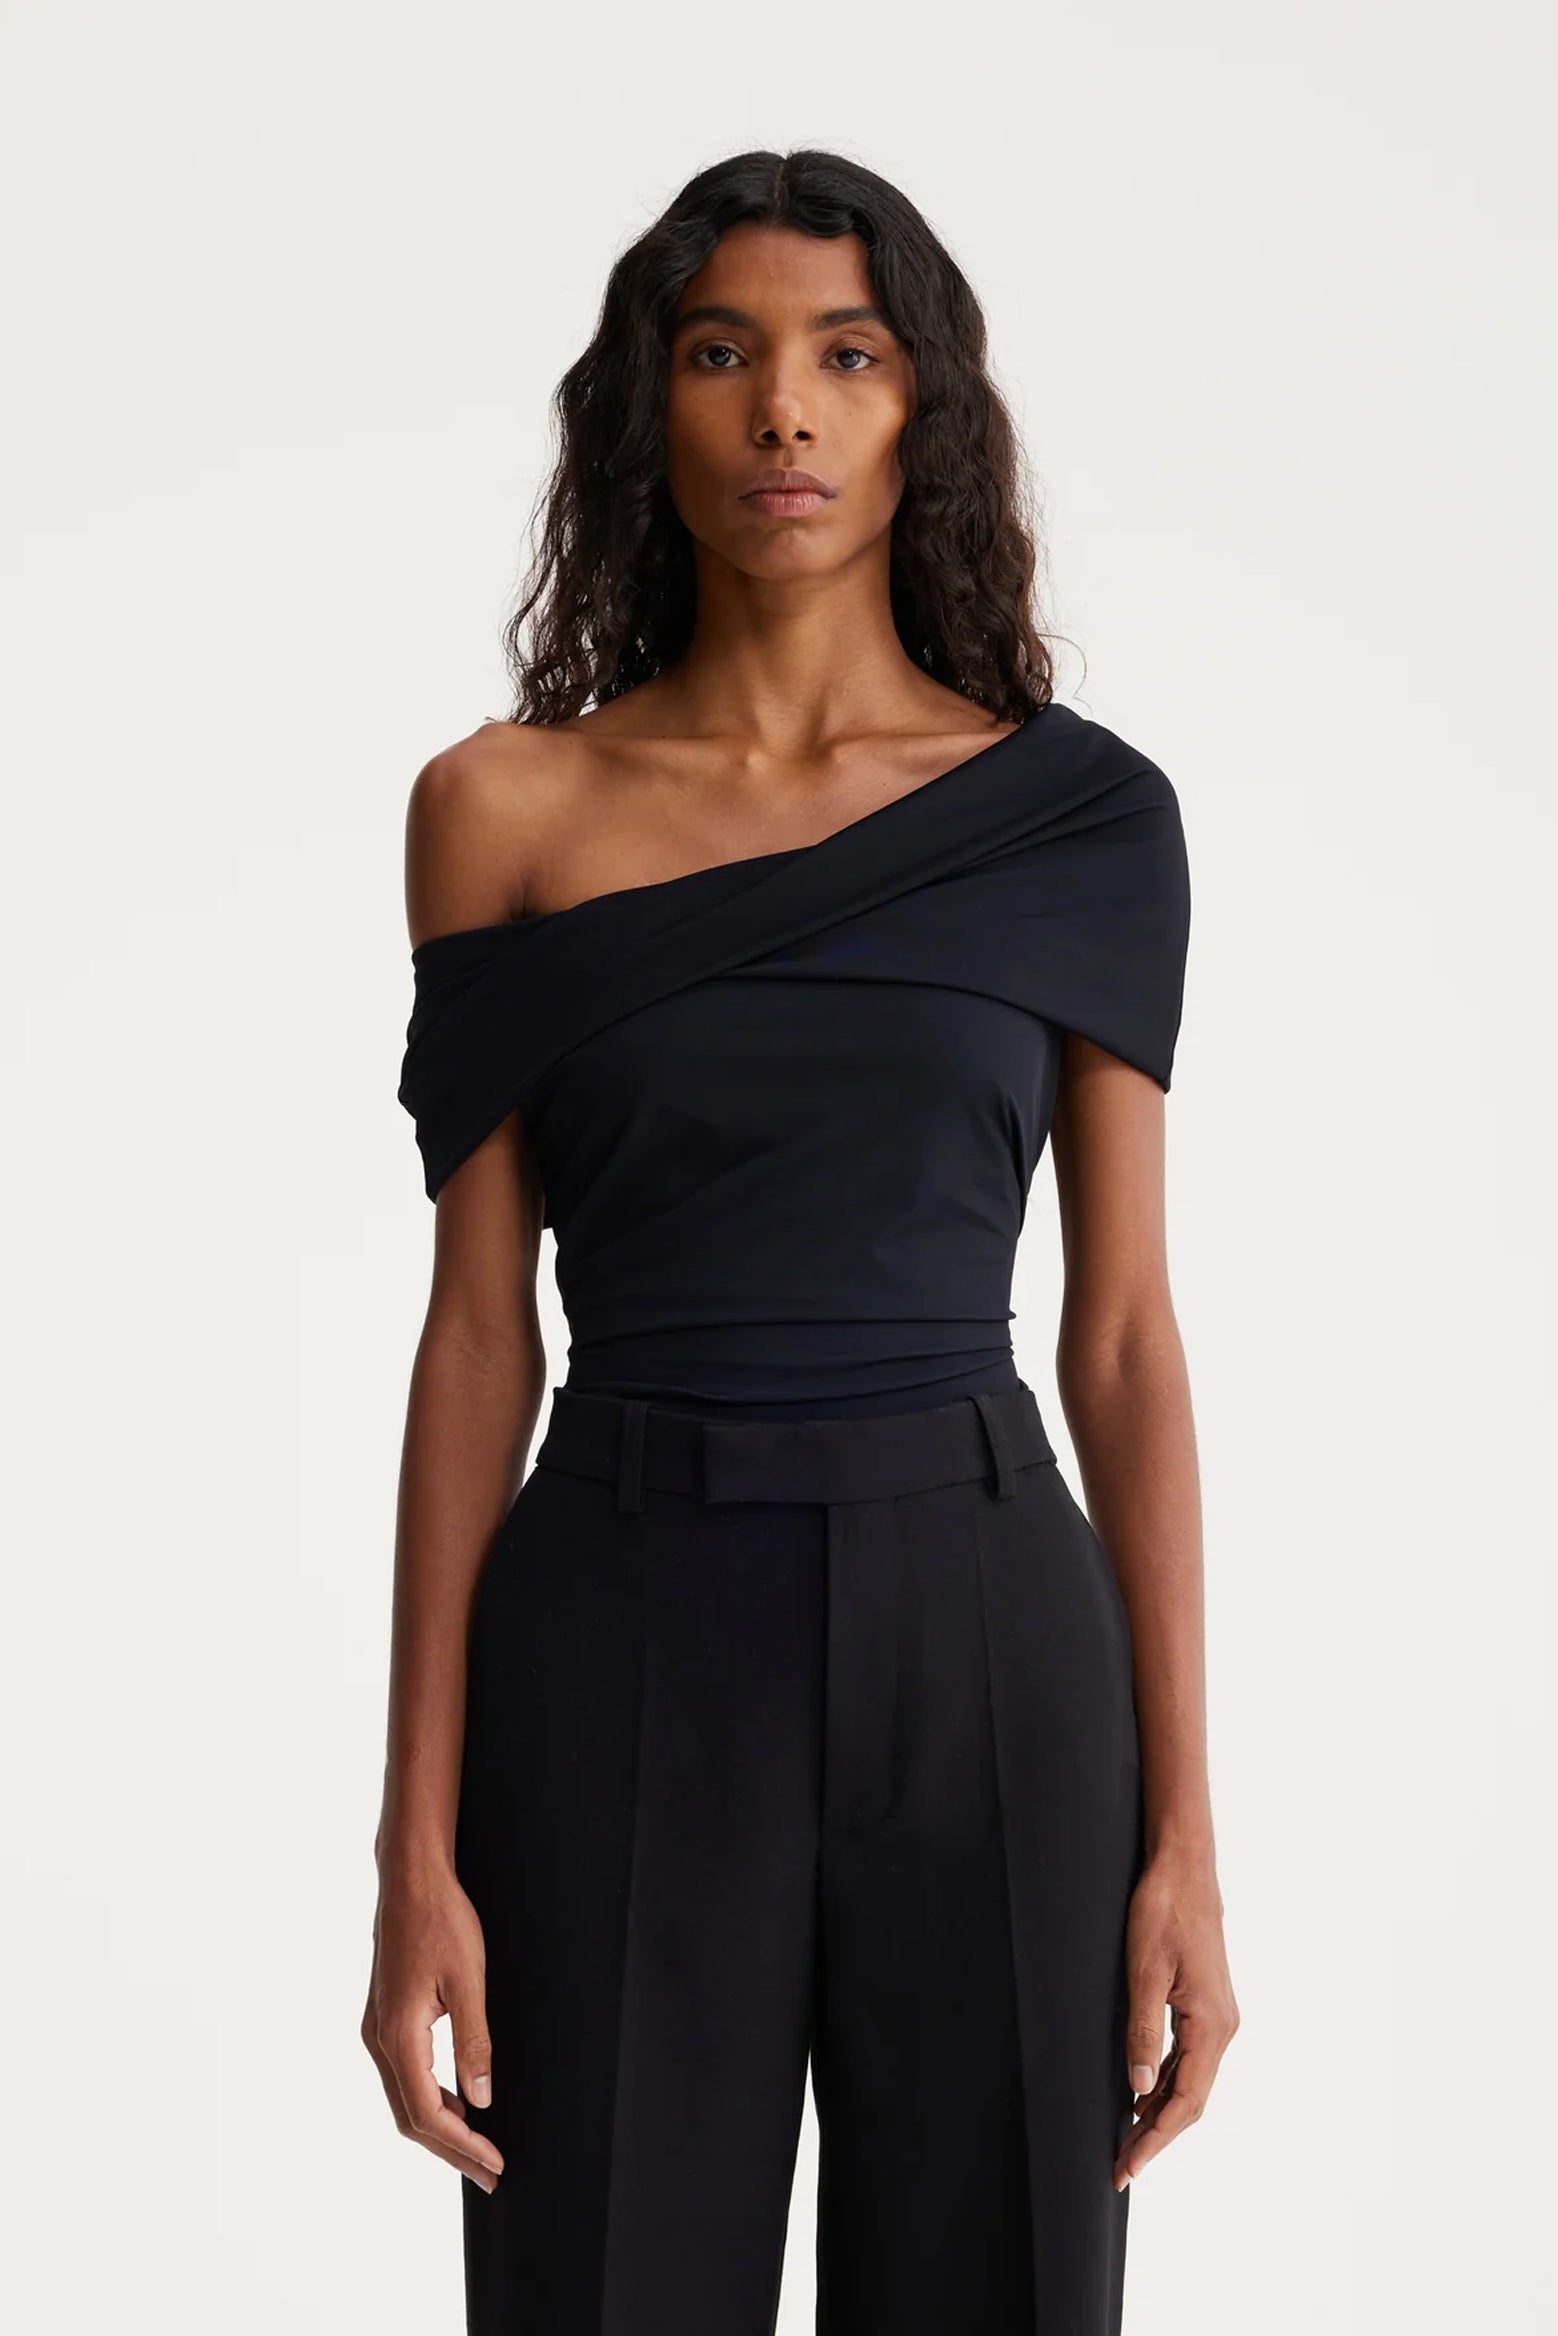 ROHE Asymmetrical Off Shoulder Top in Noir available at The New Trend Australia.